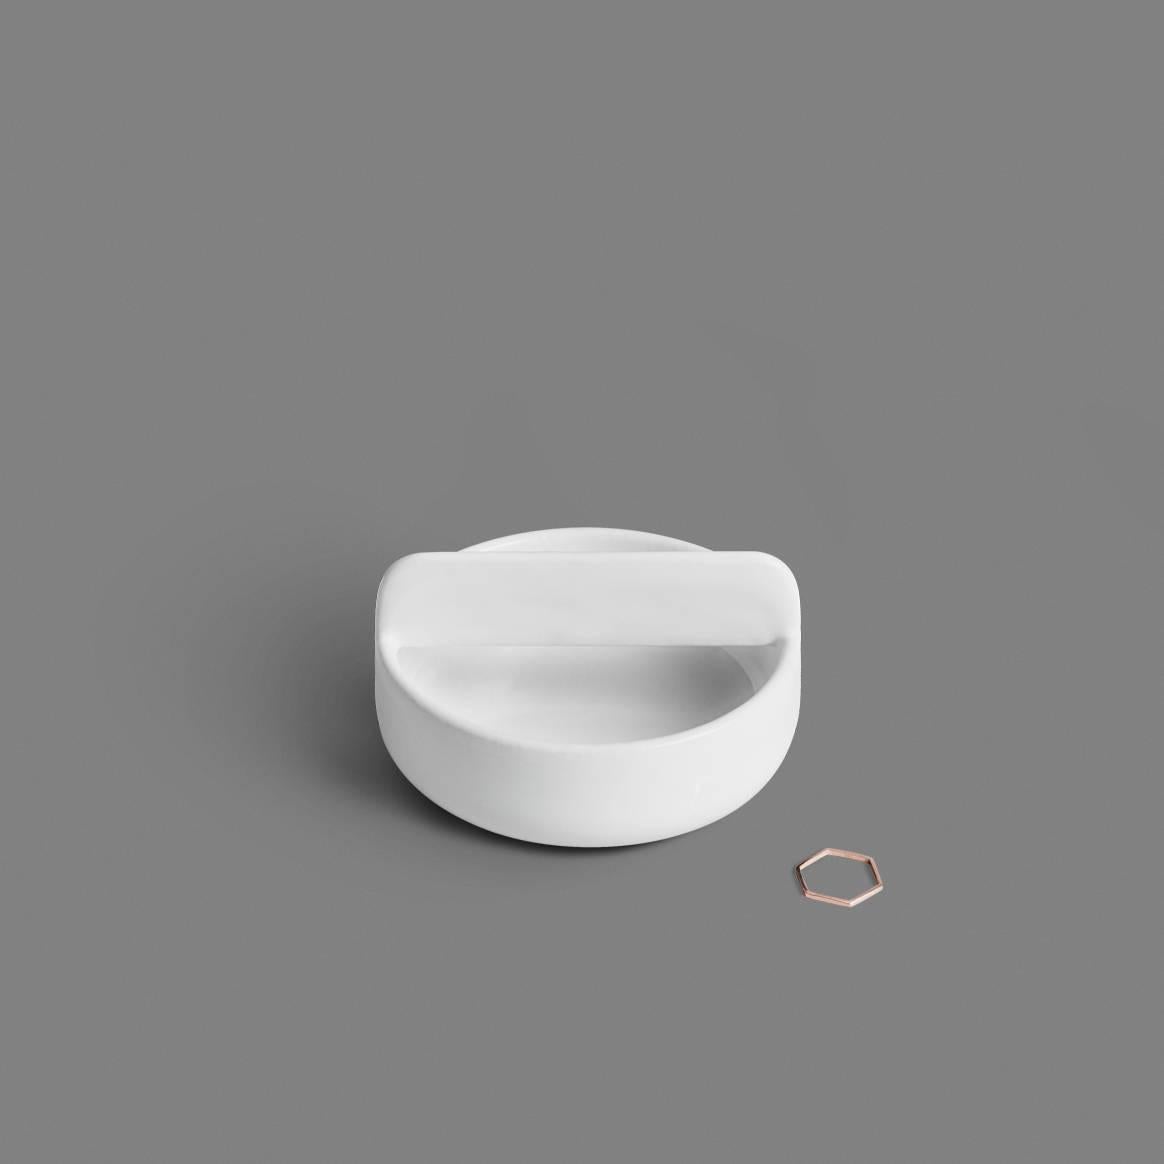 Trestle Bowl / Vessel Set in Contemporary 3D Printed Gloss White Porcelain In Excellent Condition For Sale In New York, NY